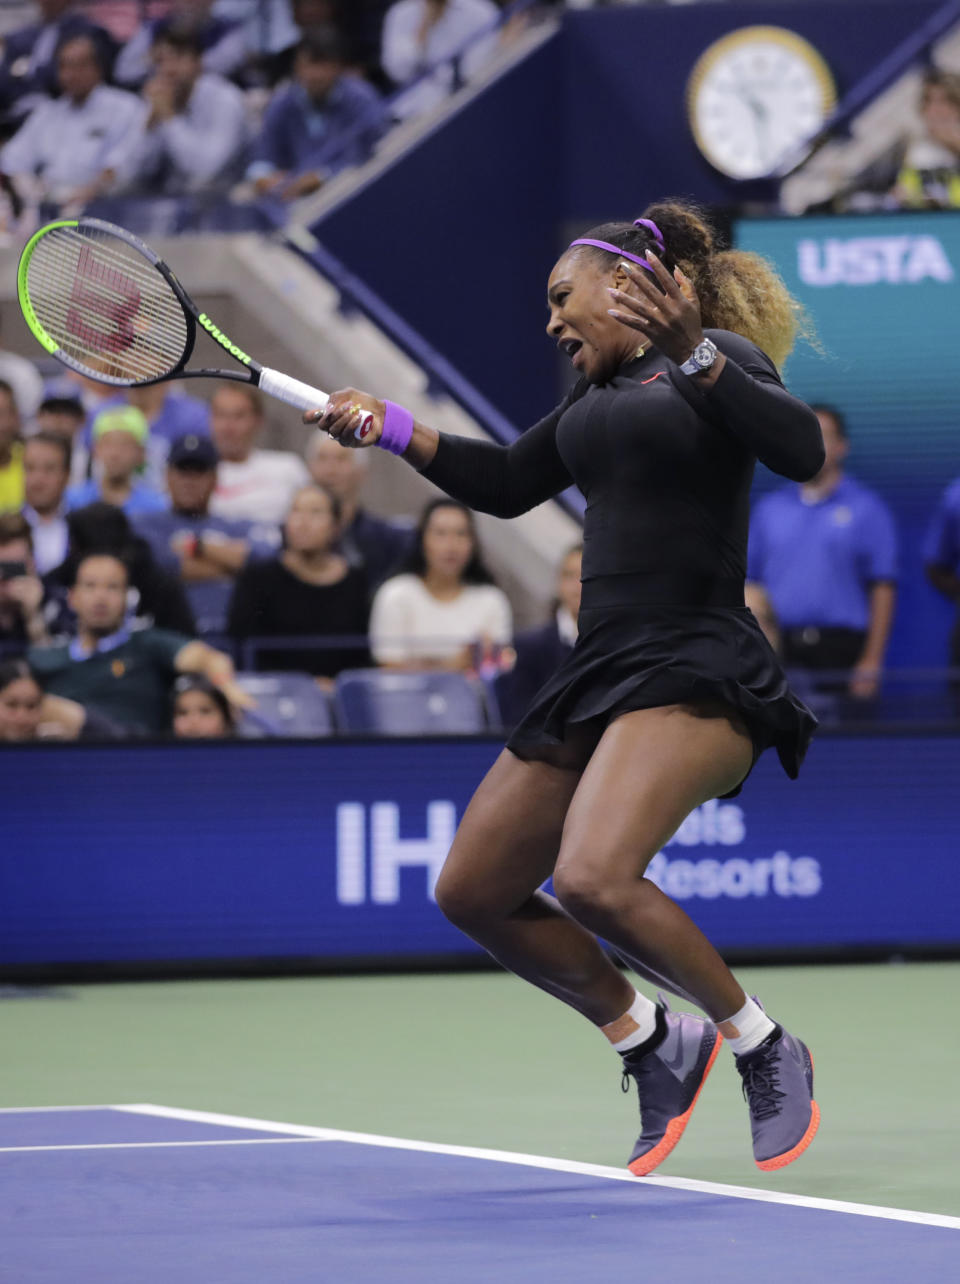 Serena Williams, of the United States, returns to Caty McNally, of the United States, during the second round of the U.S. Open tennis tournament in New York, Wednesday, Aug. 28, 2019. (AP Photo/Charles Krupa)